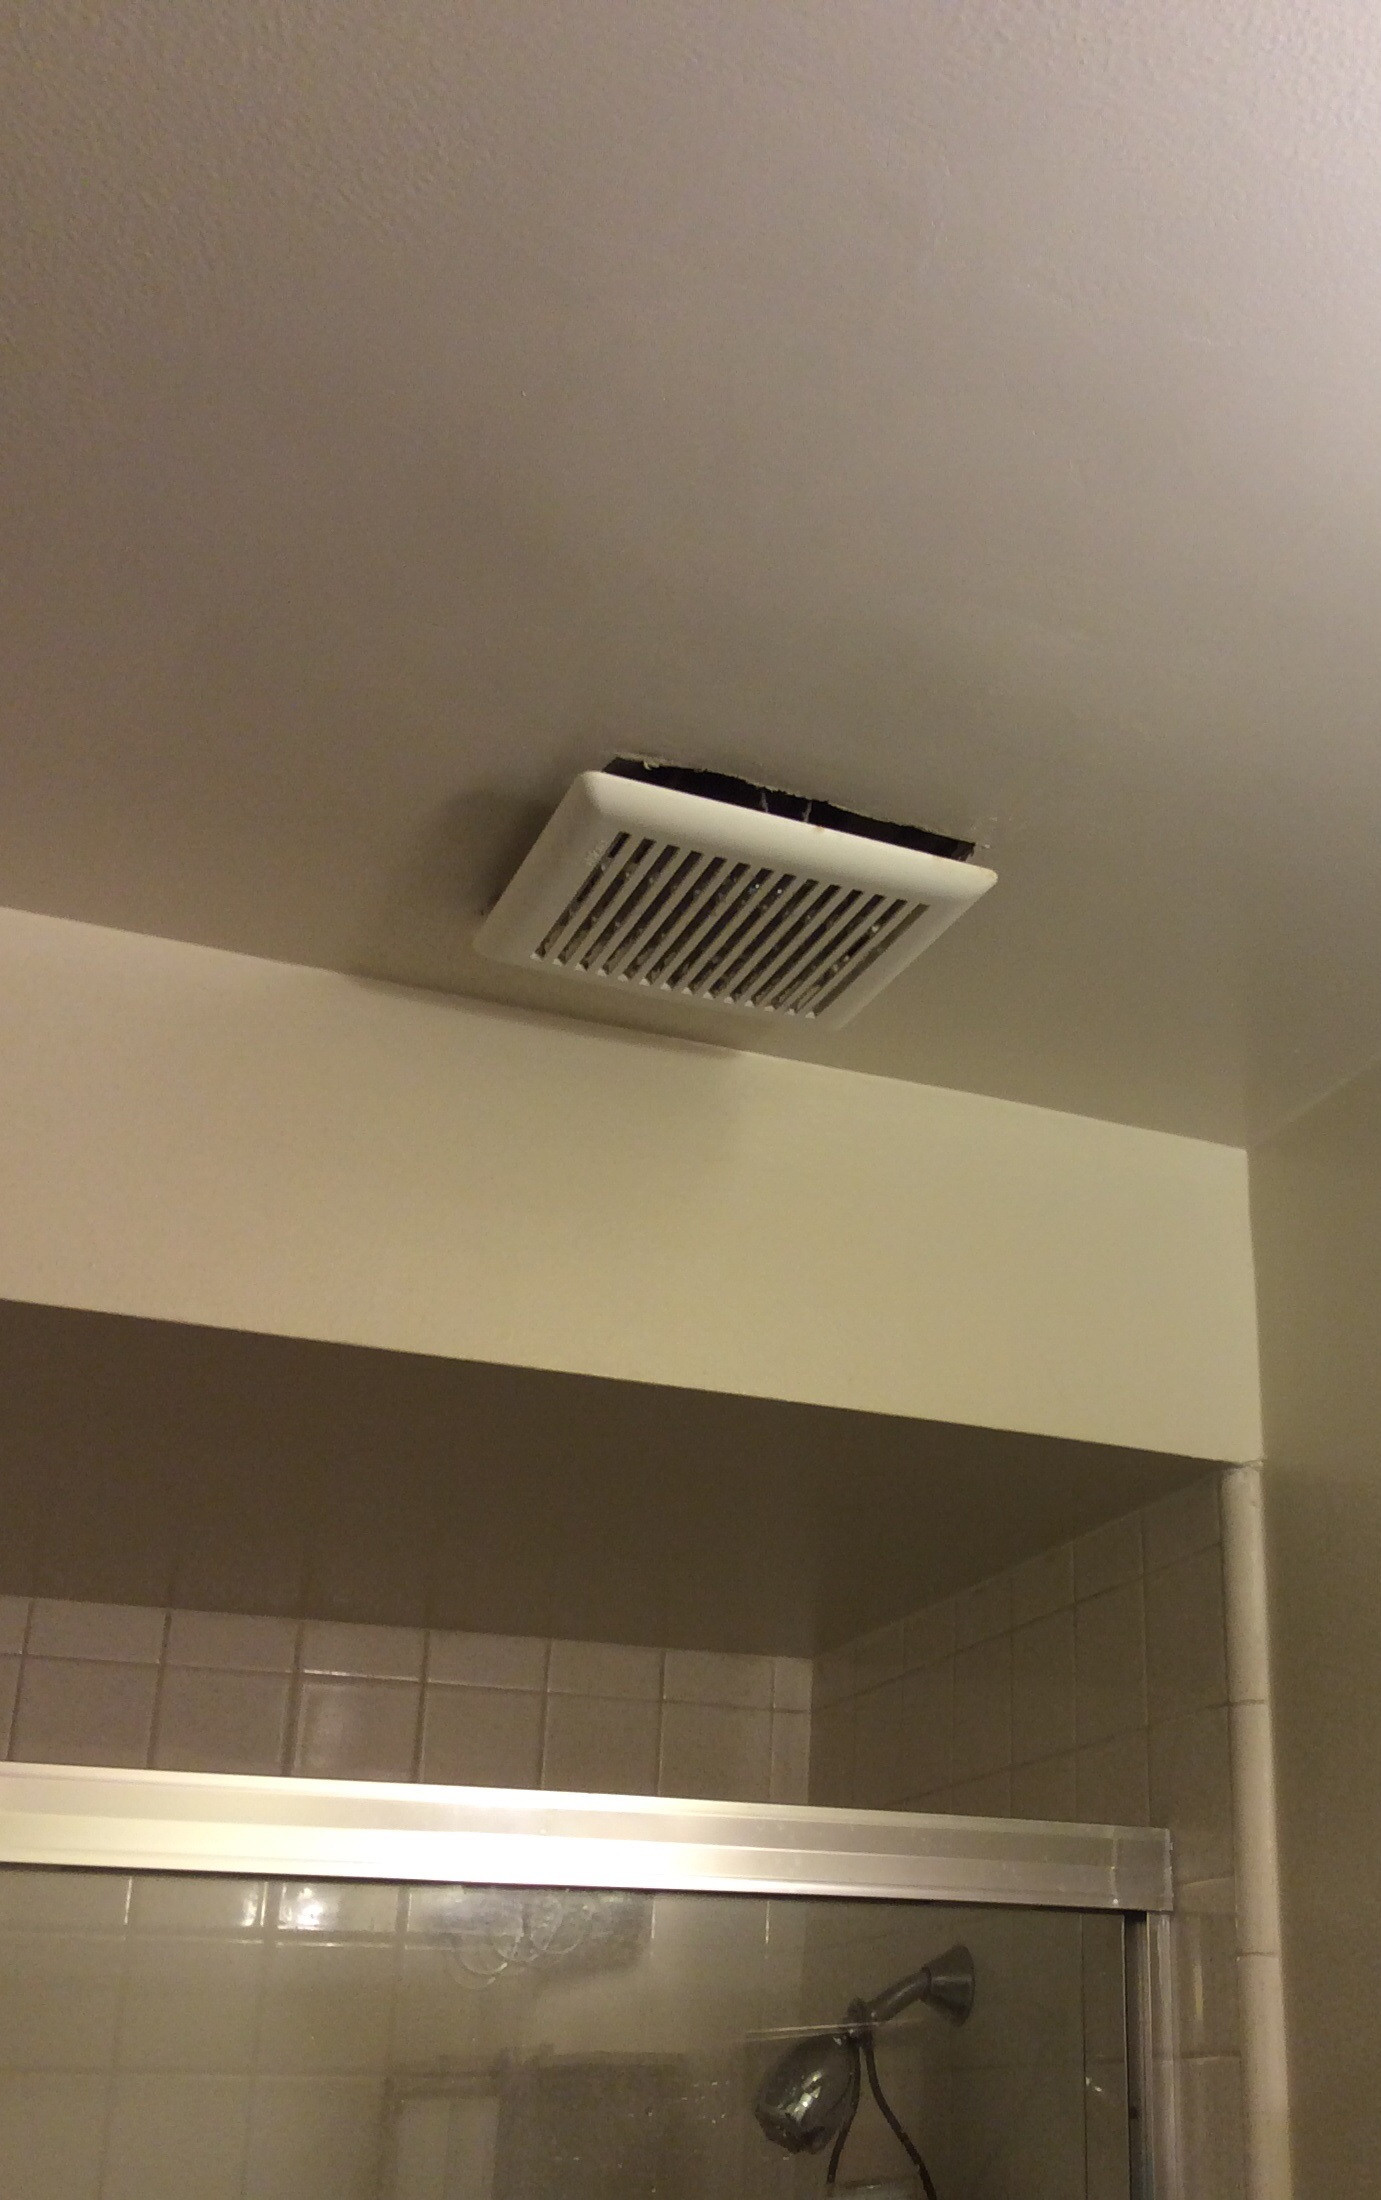 Bathroom Exhaust Fan Cover
 bathroom Is it normal for an exhaust fan cover to hang